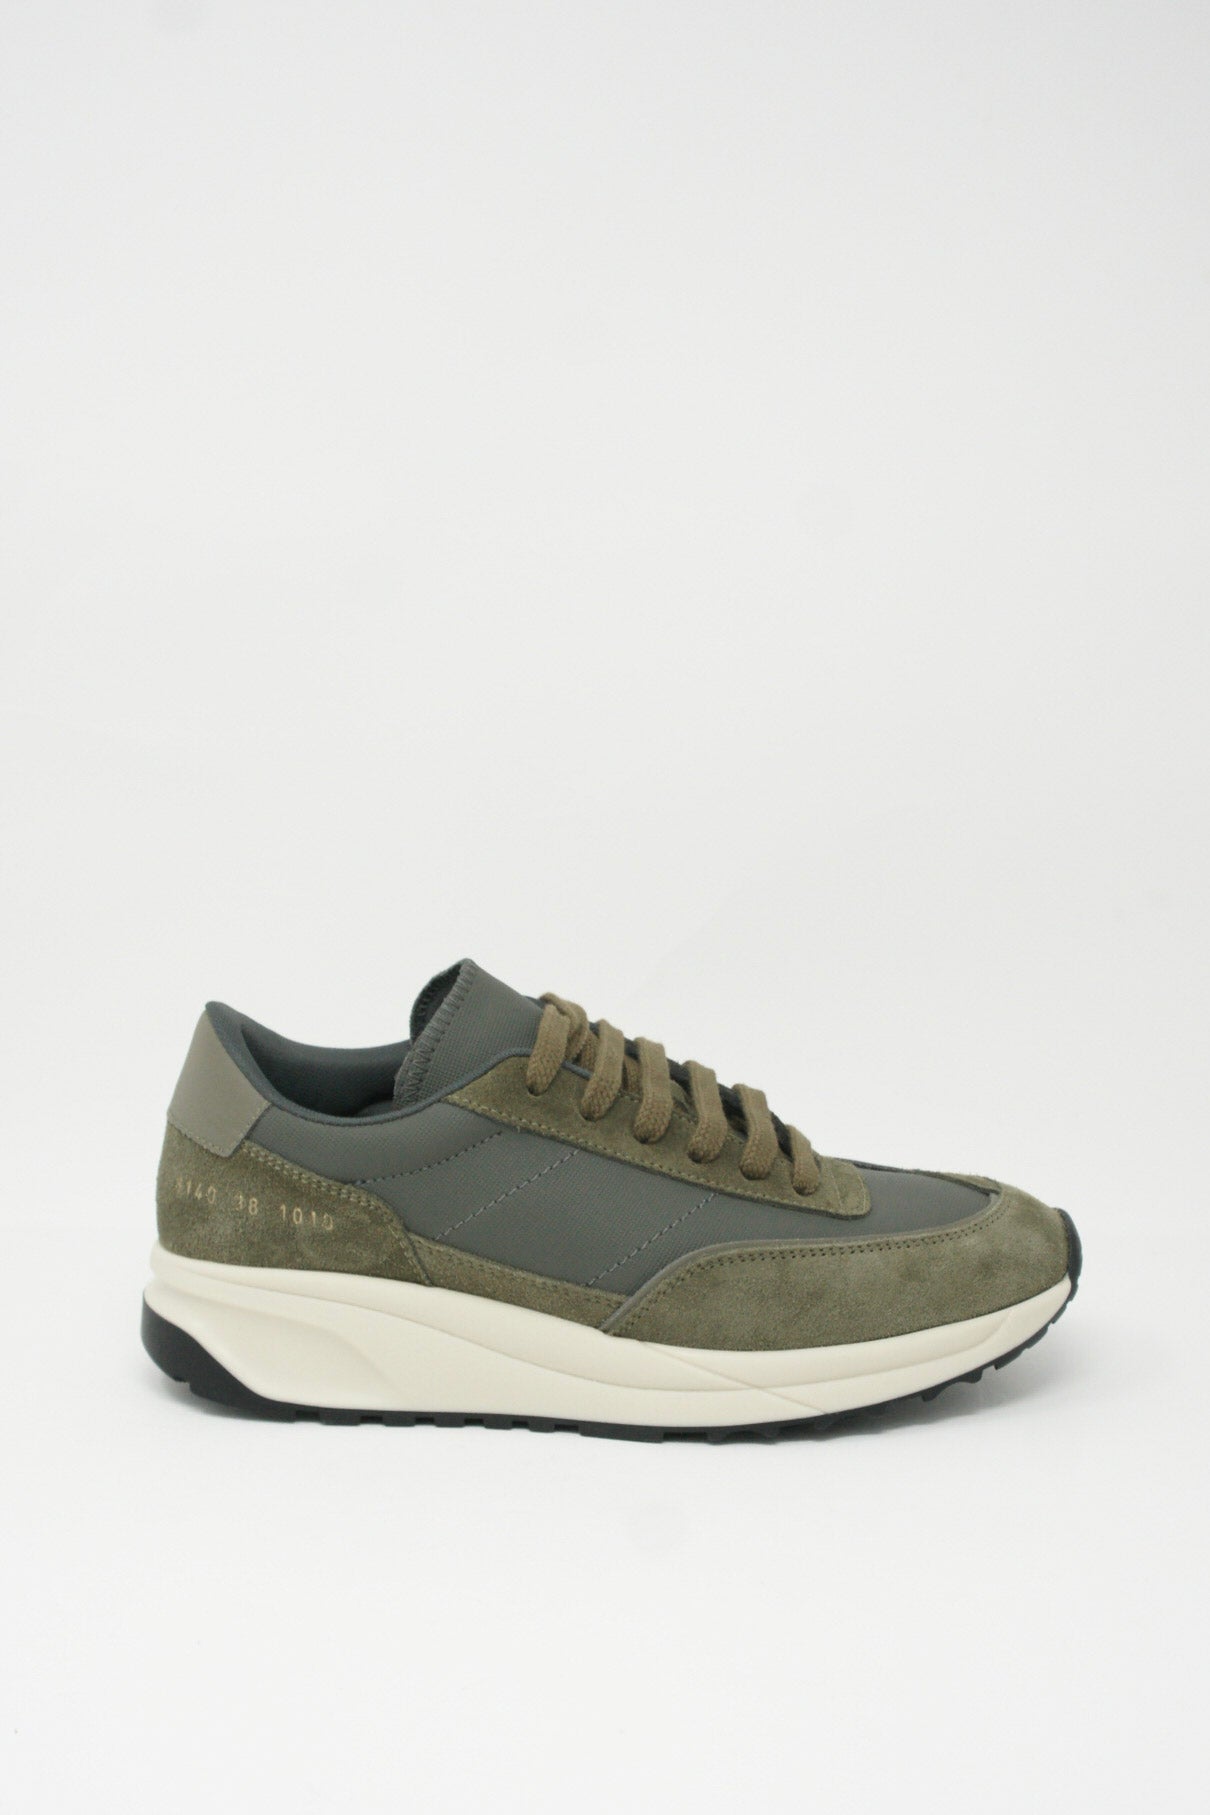 A pair of olive suede sneakers, Common Projects Track Technical Article Sneaker 6140, with lace-up closure and foam midsole, set against a white background.